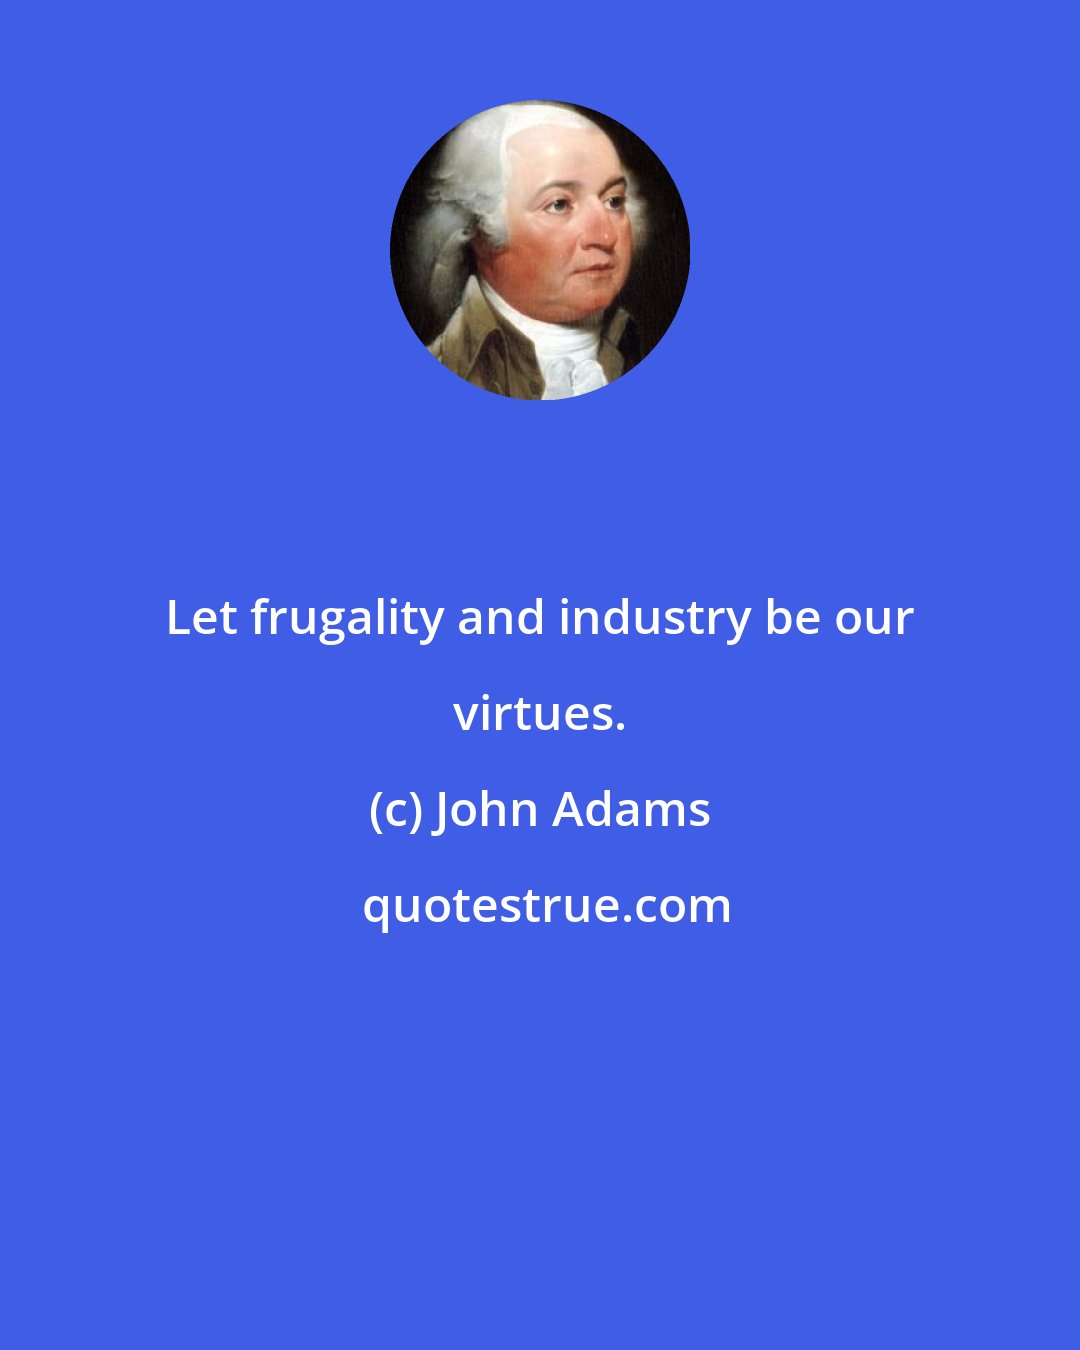 John Adams: Let frugality and industry be our virtues.